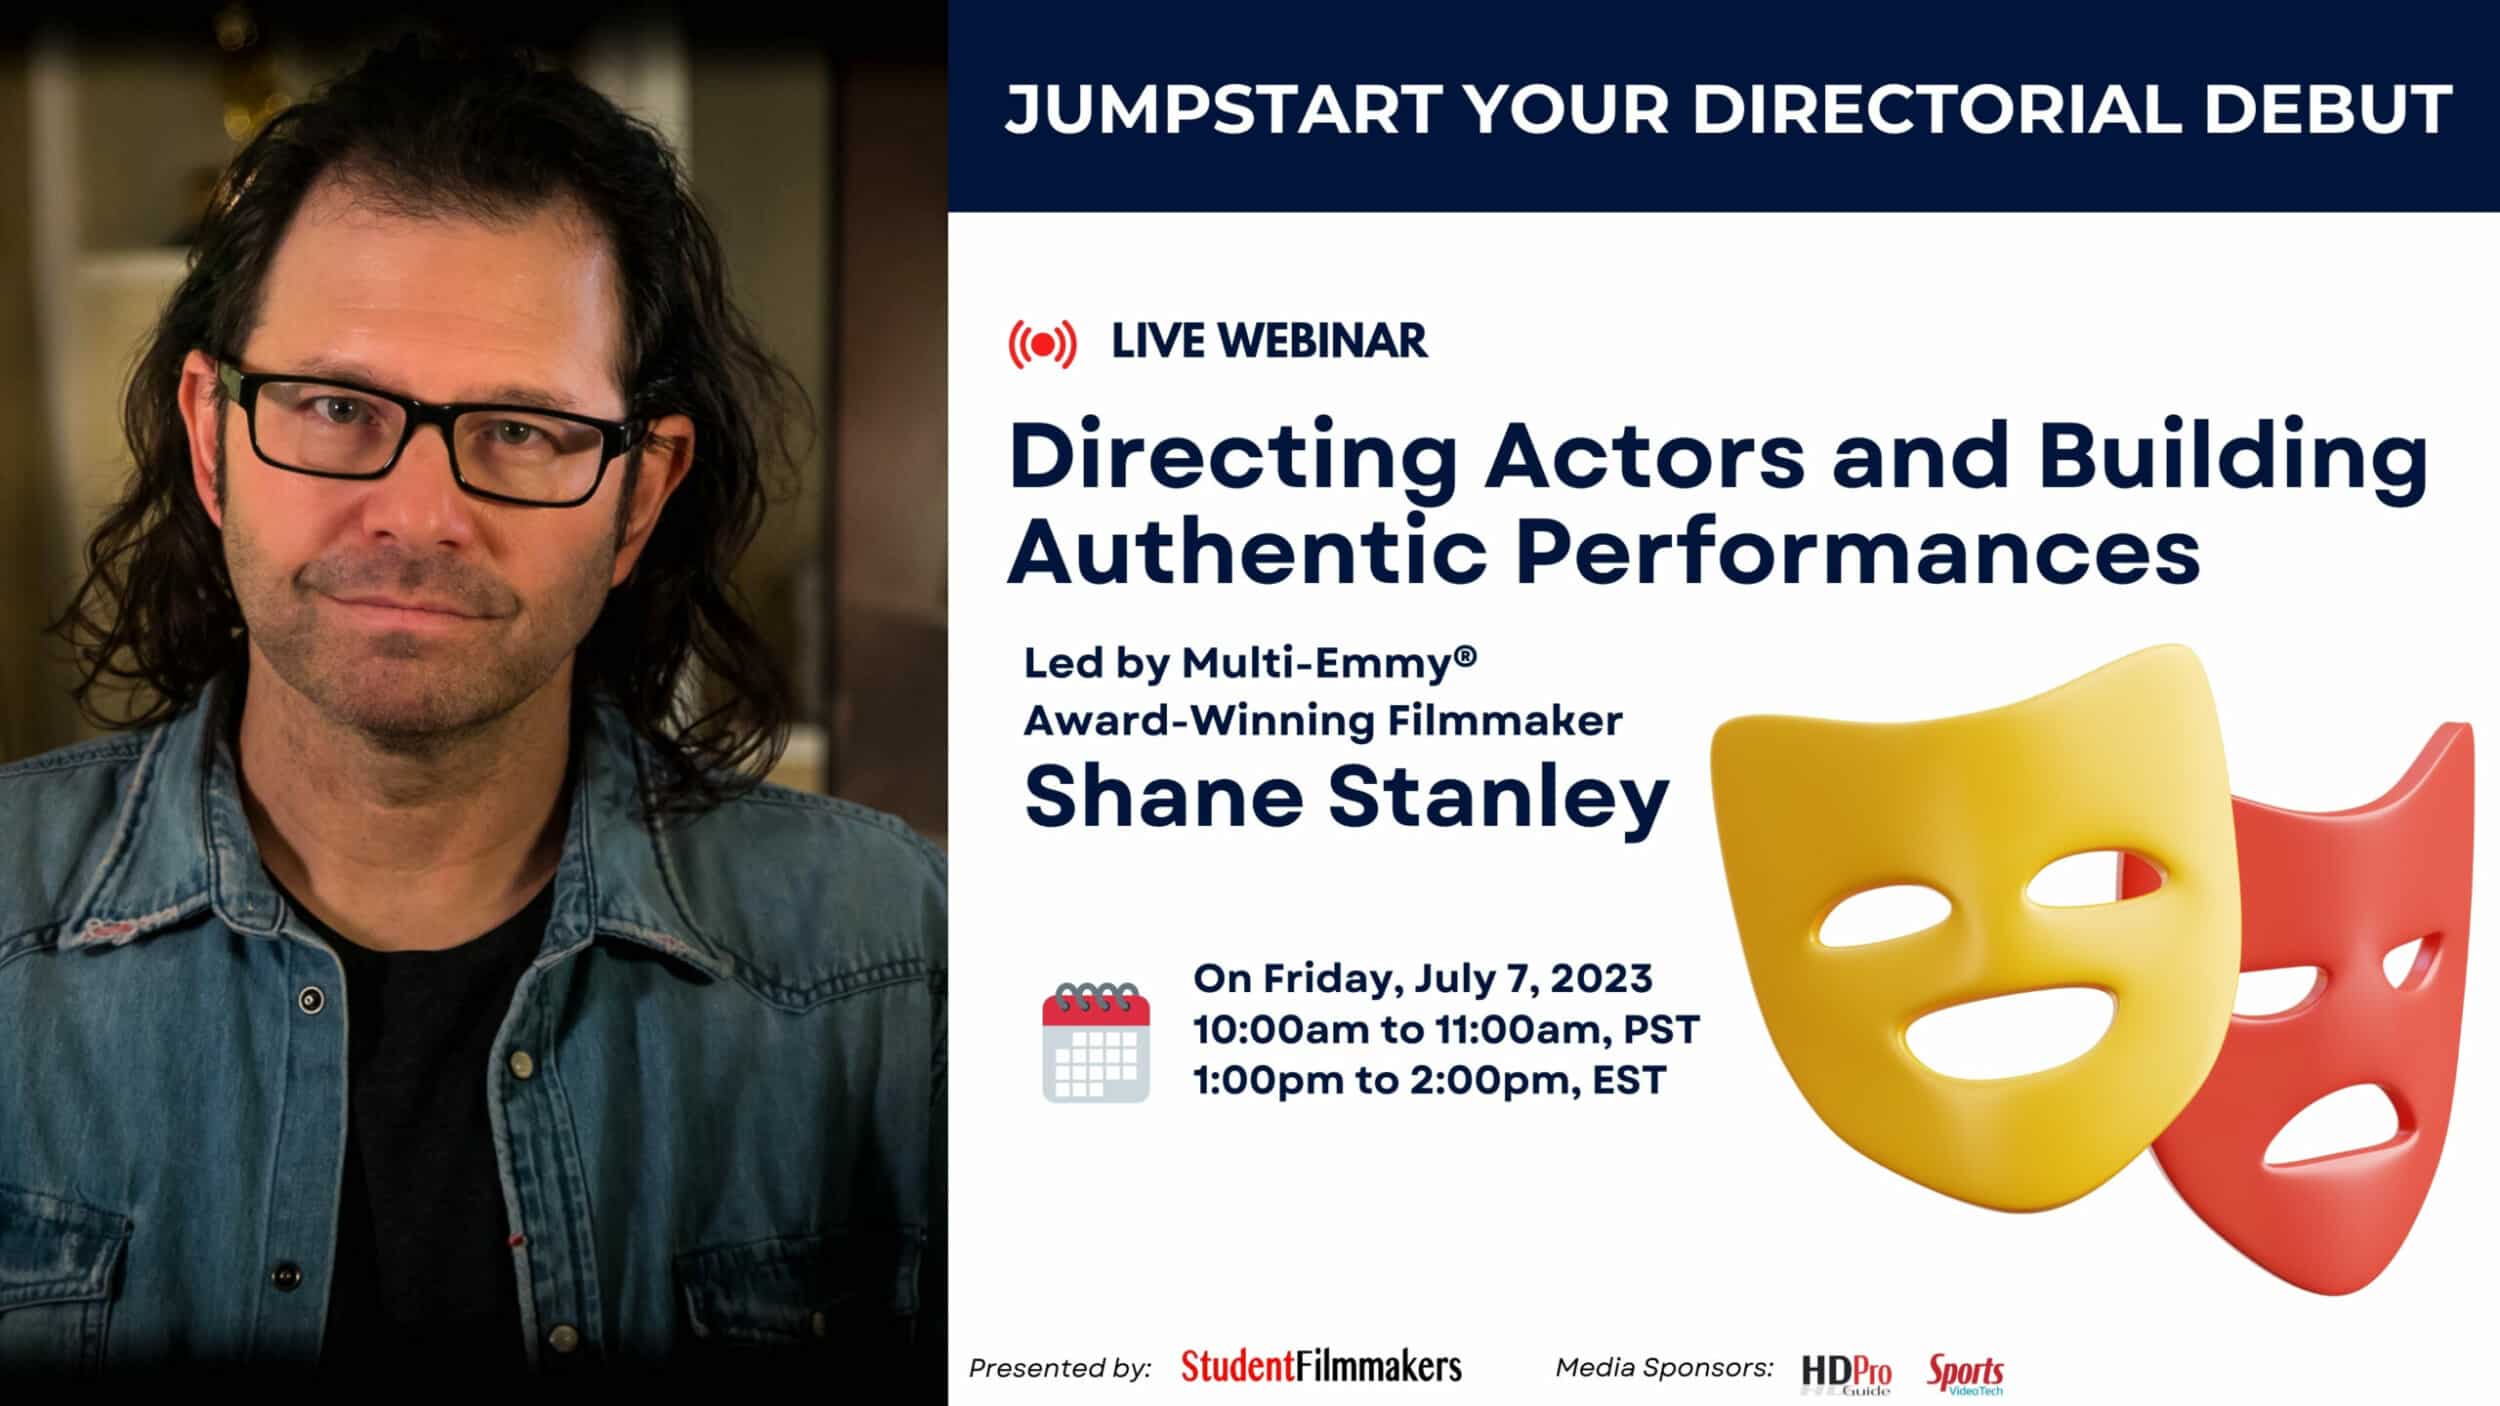 Jumpstart Your Directorial Debut: "Directing Actors and Building Authentic Performances" with Shane Stanley. Produced and hosted by StudentFilmmakers.com and Student Filmmakers Magazine